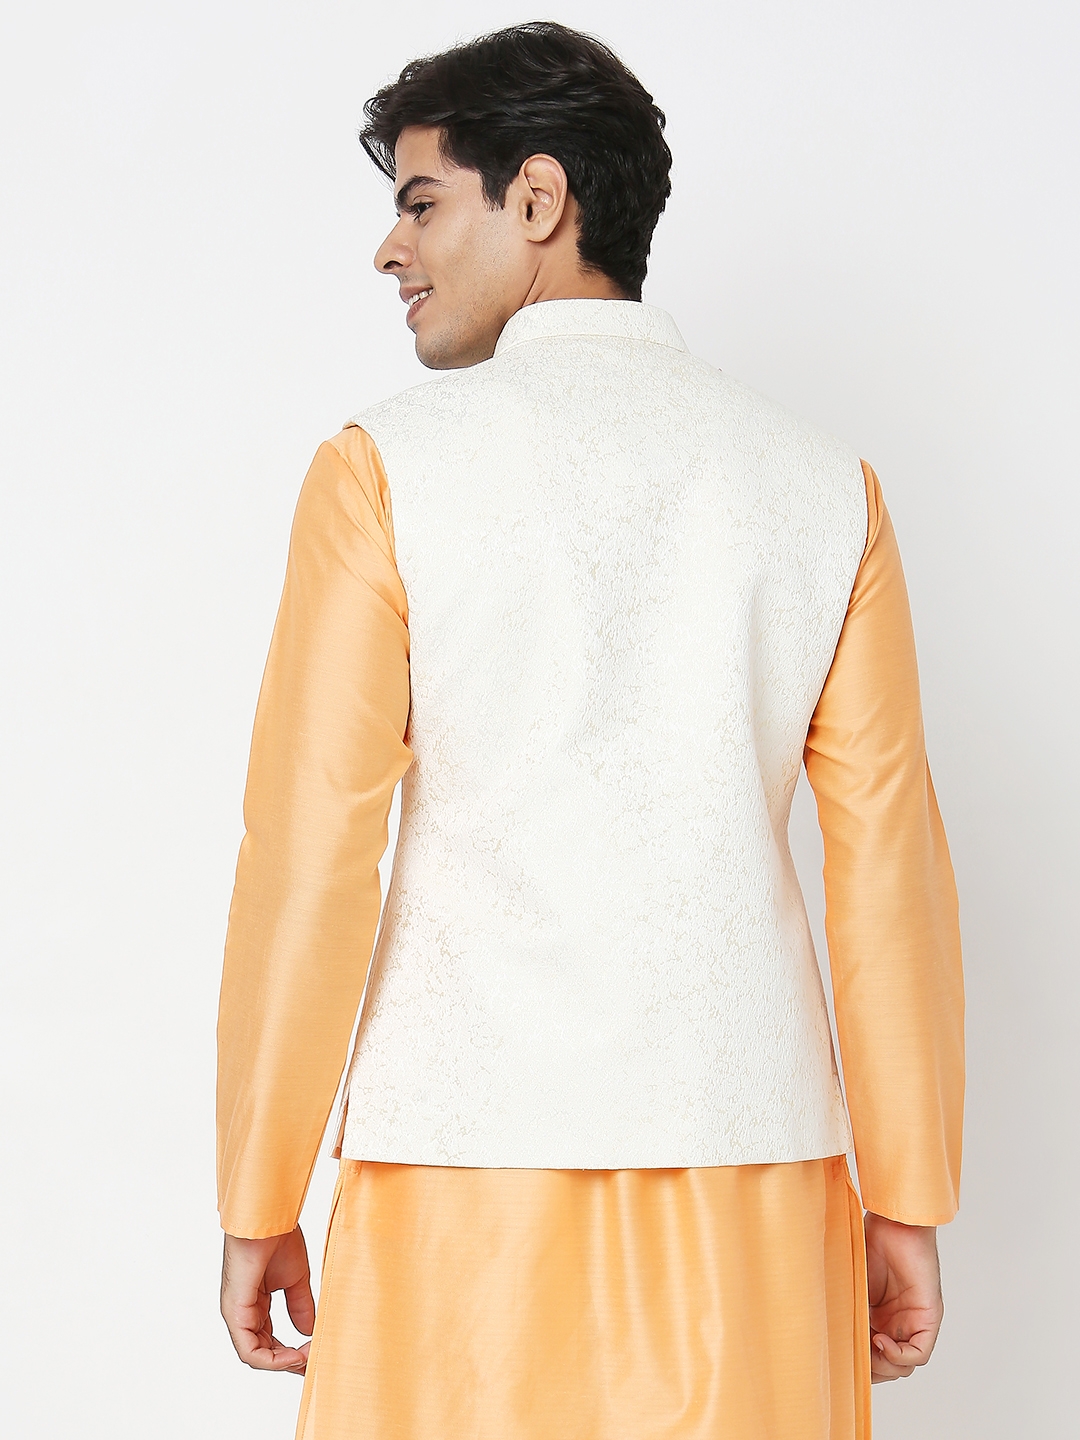 Ethnicity Men's Cream Polyester Solid Jackets | M